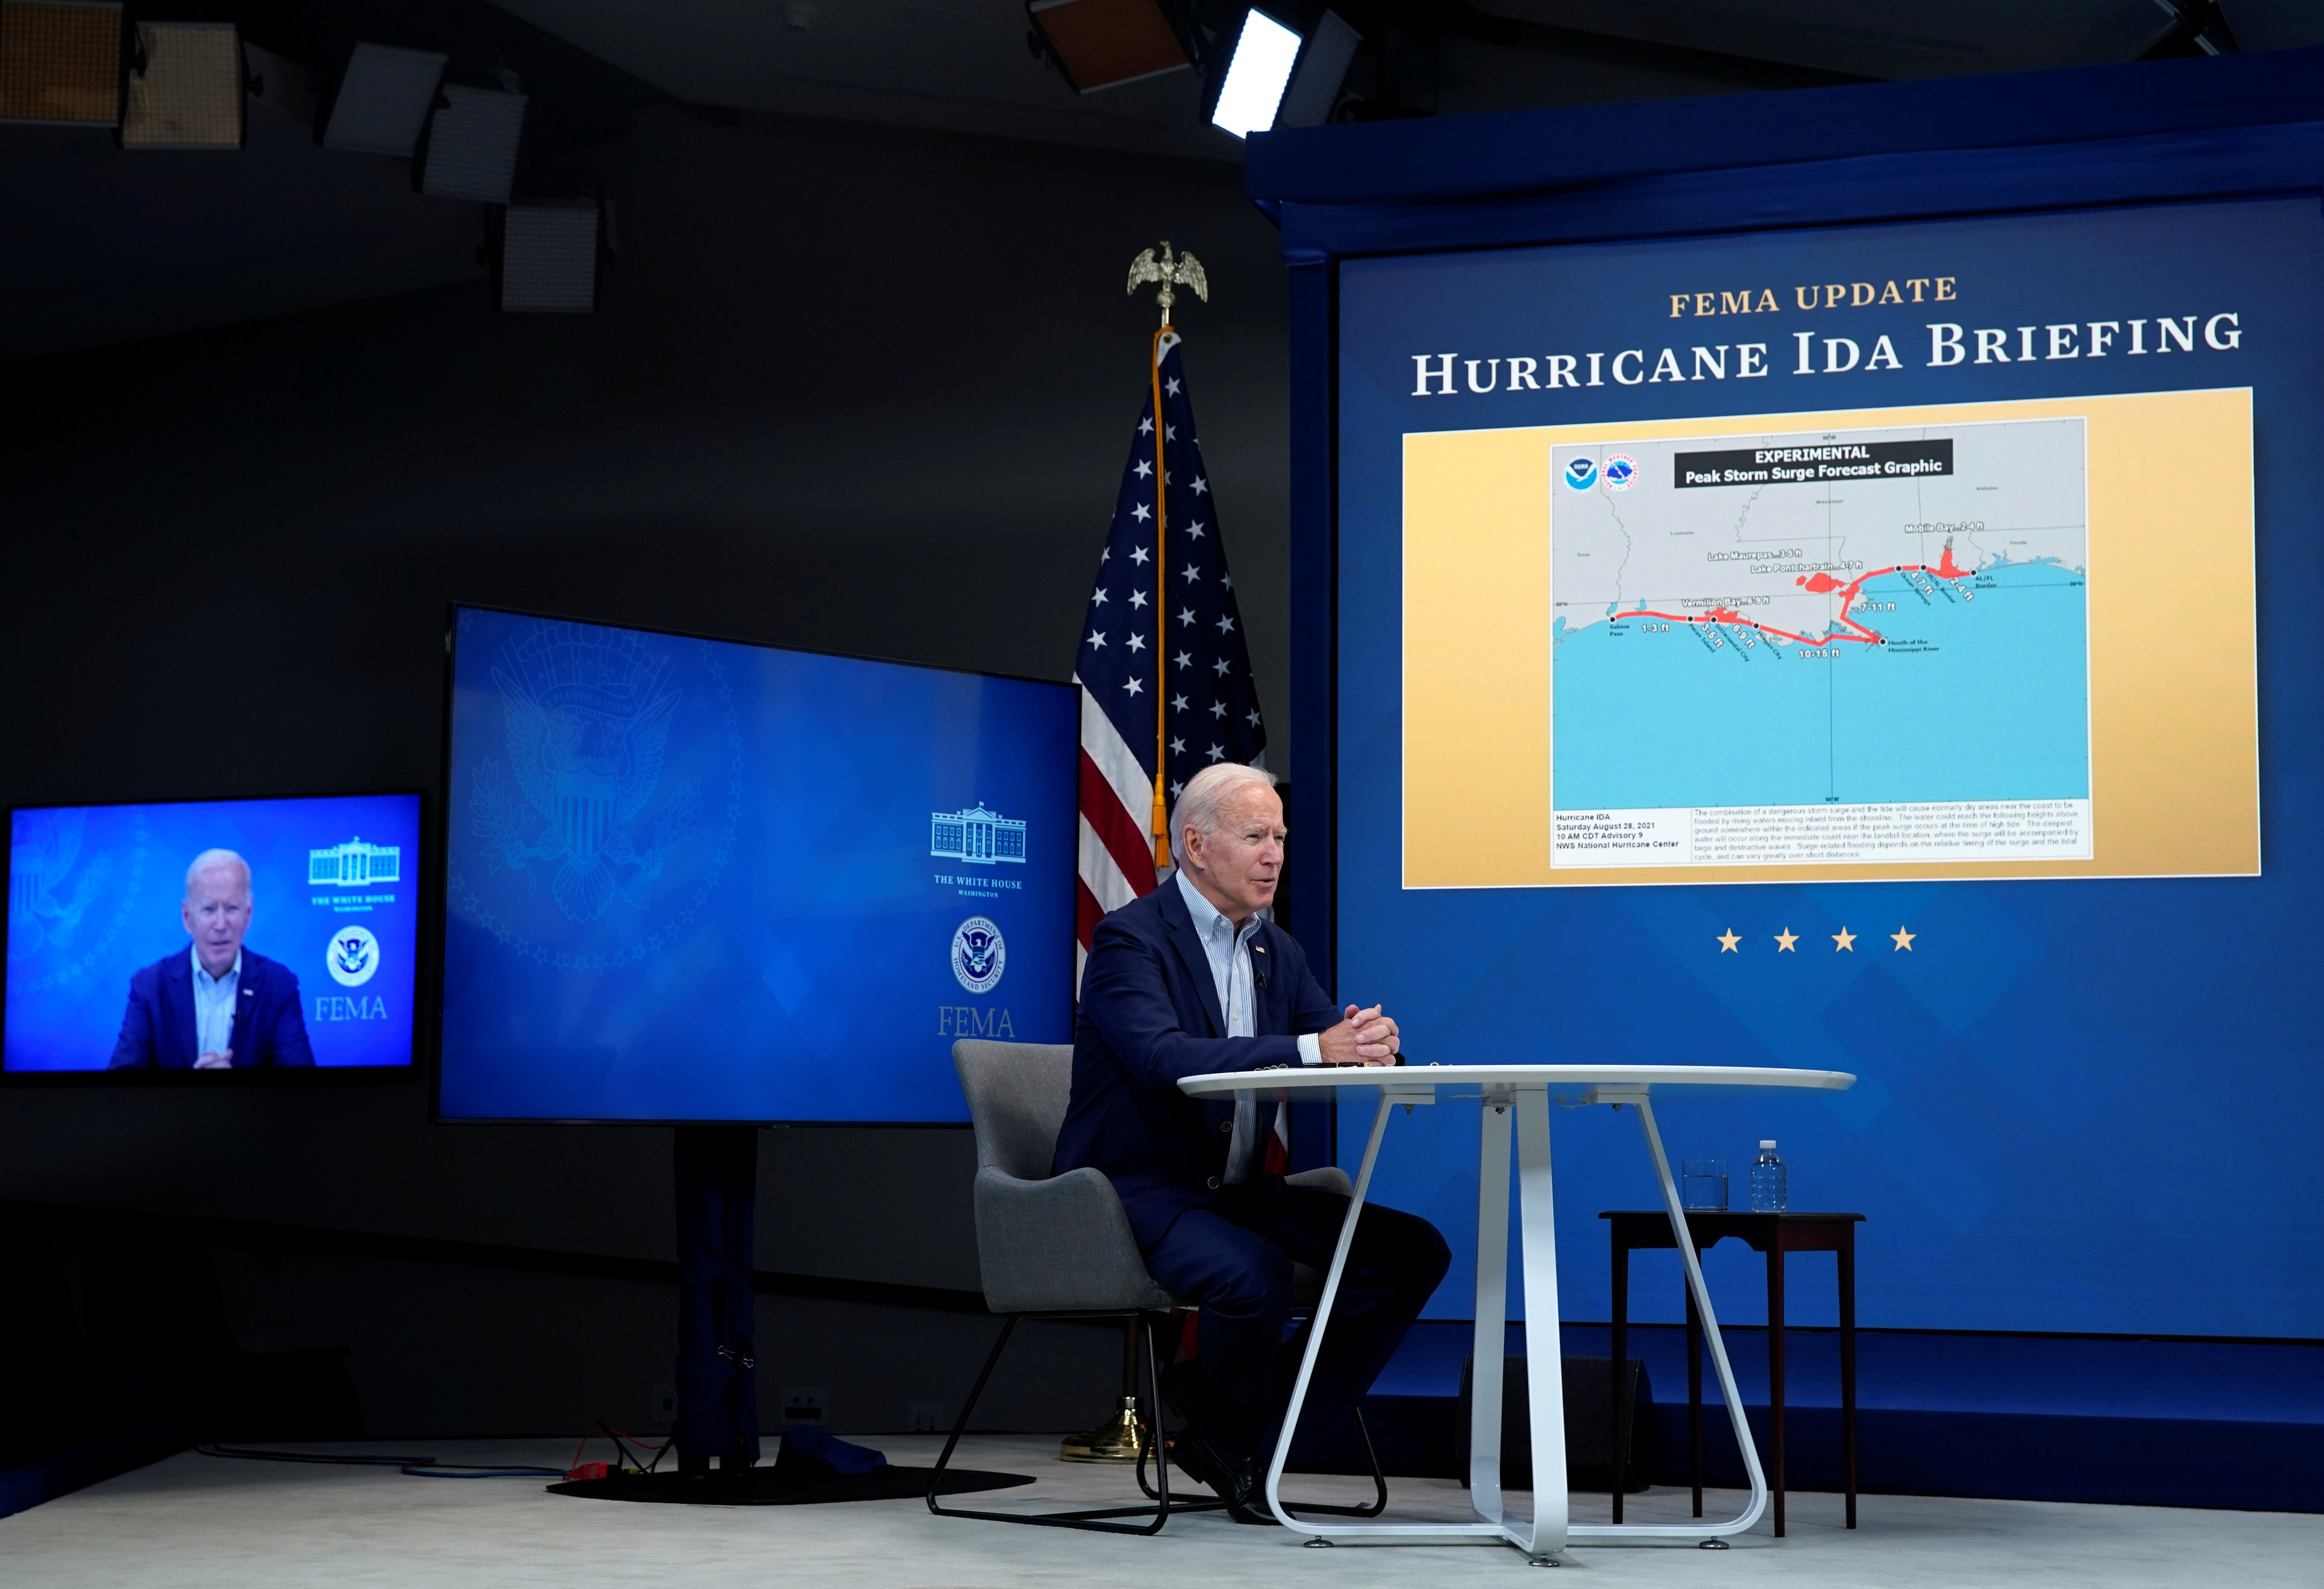 U.S. President Joe Biden speaks during a virtual briefing with FEMA Administrator Deanne Criswell on preparations for Hurricane Ida at the White House in Washington